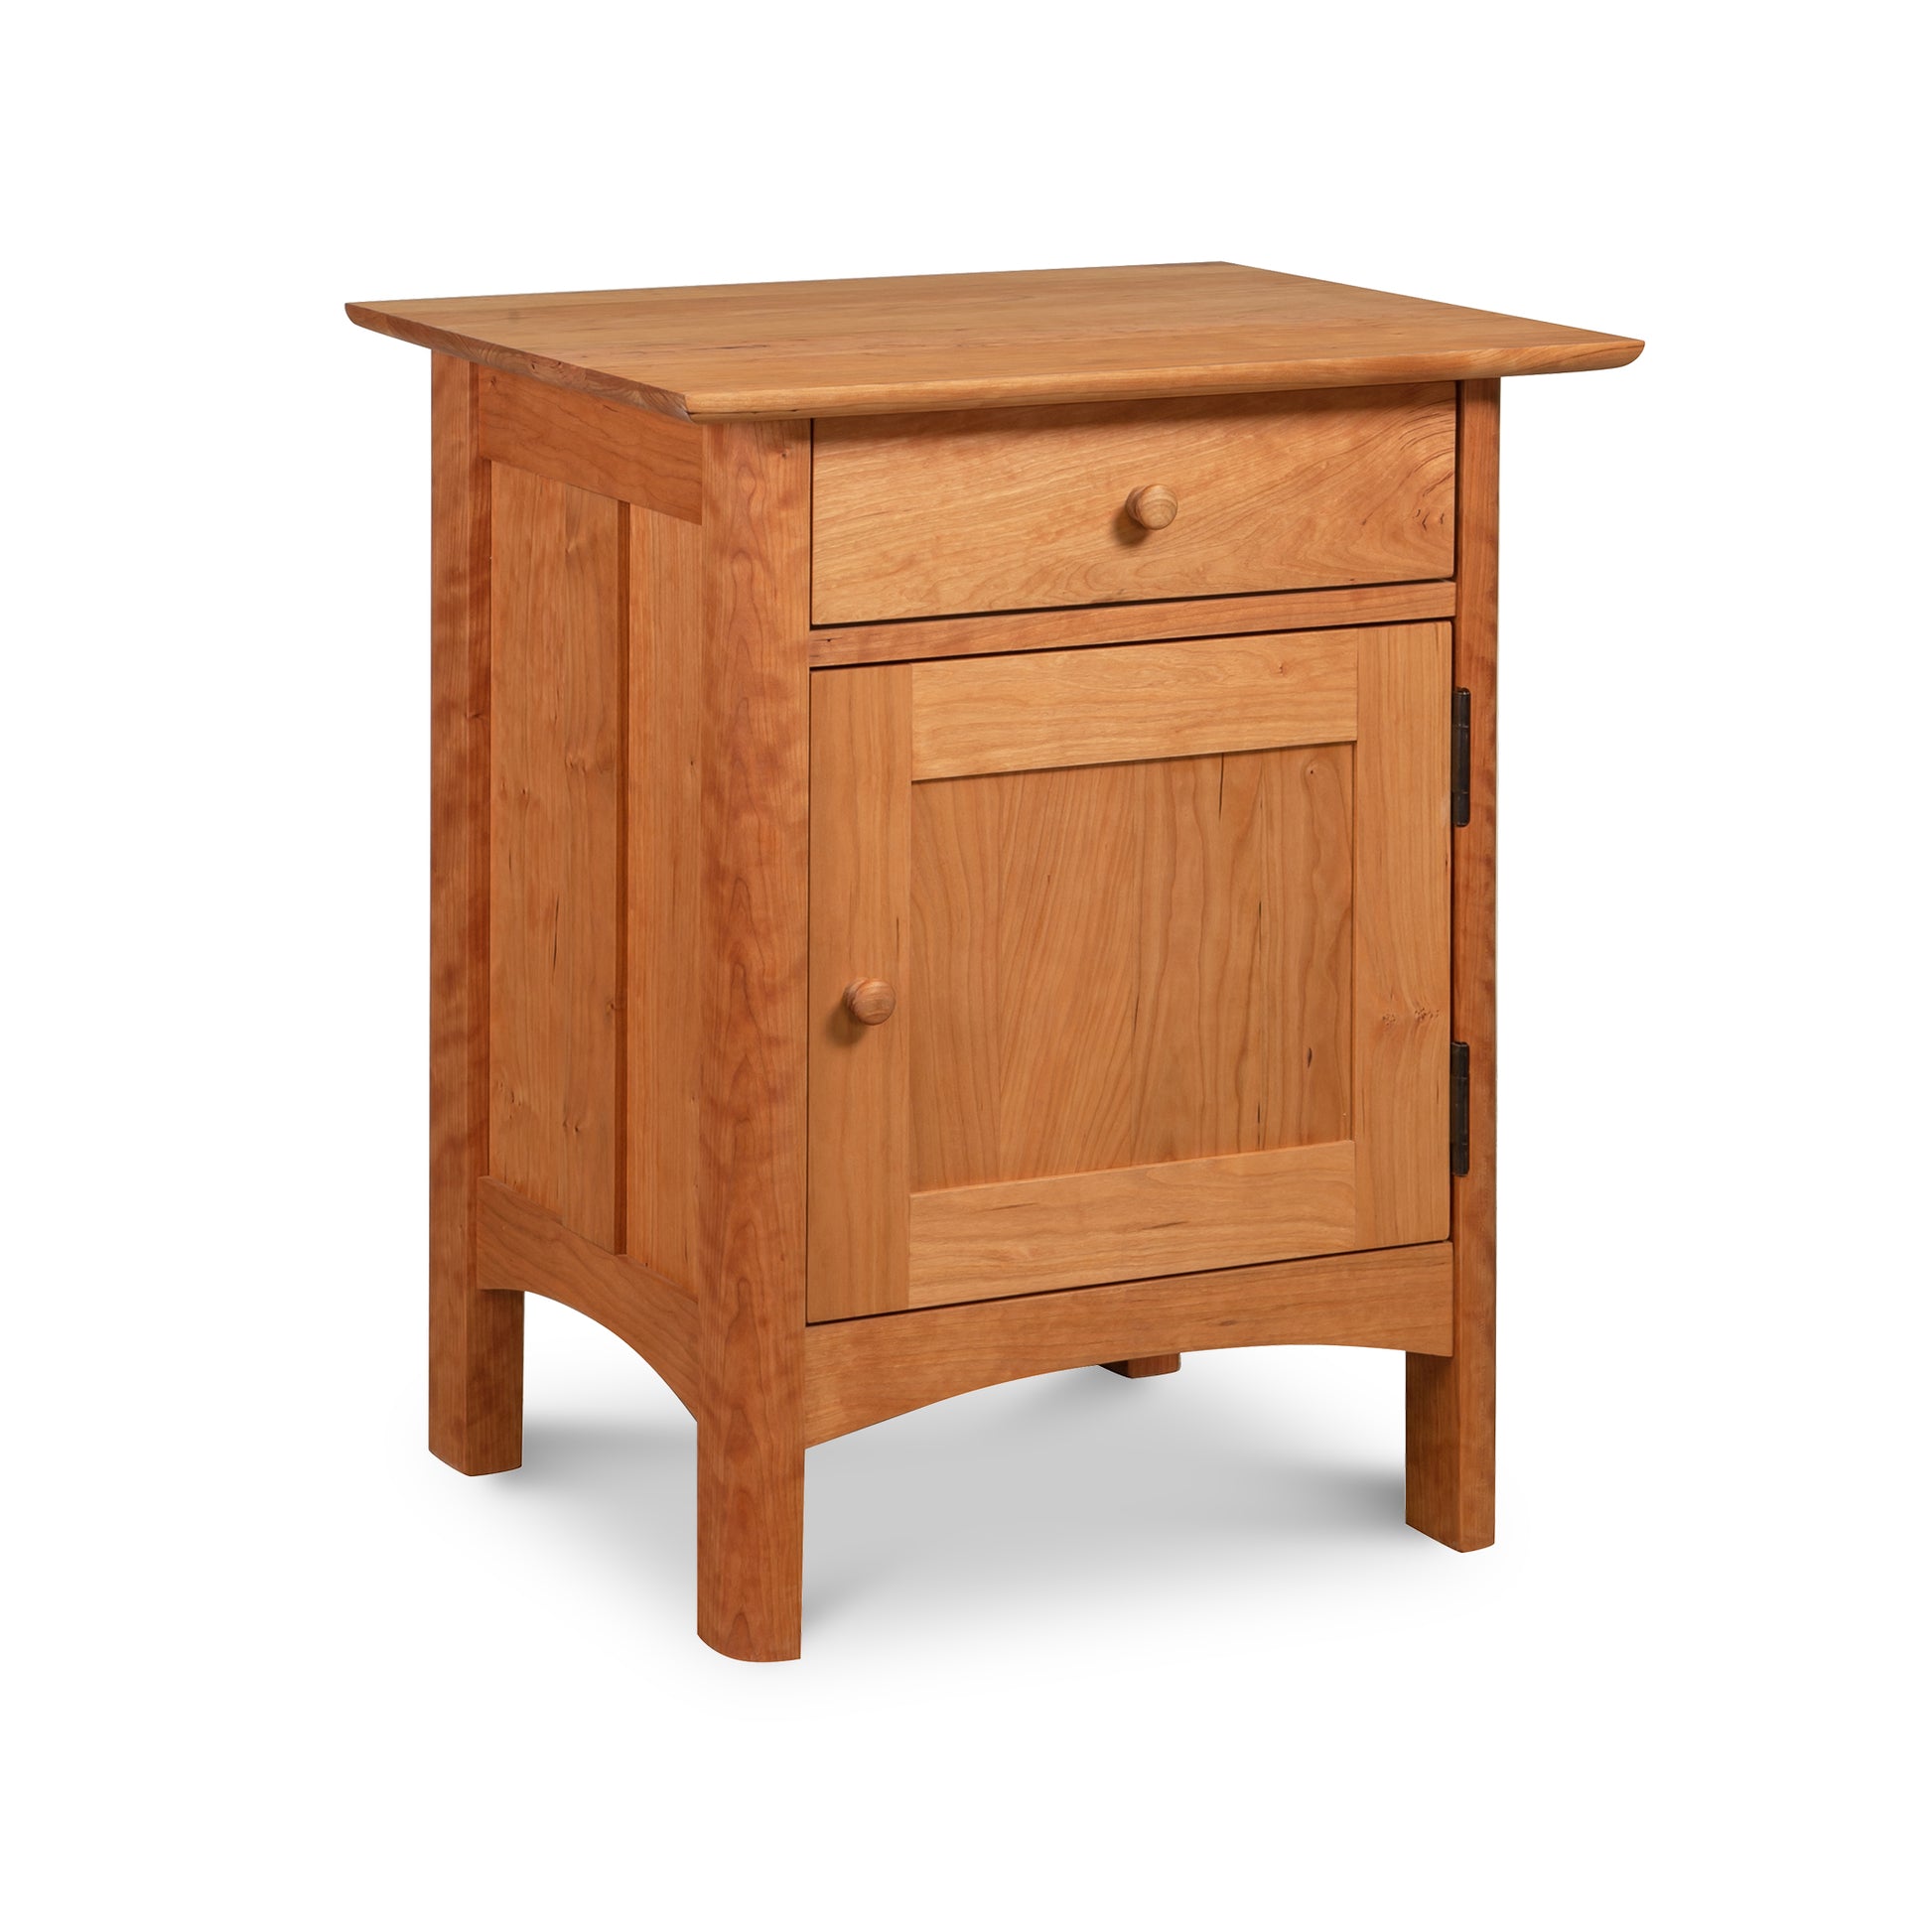 Vermont Furniture Designs Heartwood Shaker 1-Drawer Nightstand with Door, crafted from solid wood with an eco-friendly oil finish, featuring a single drawer and a cabinet door on a white background.